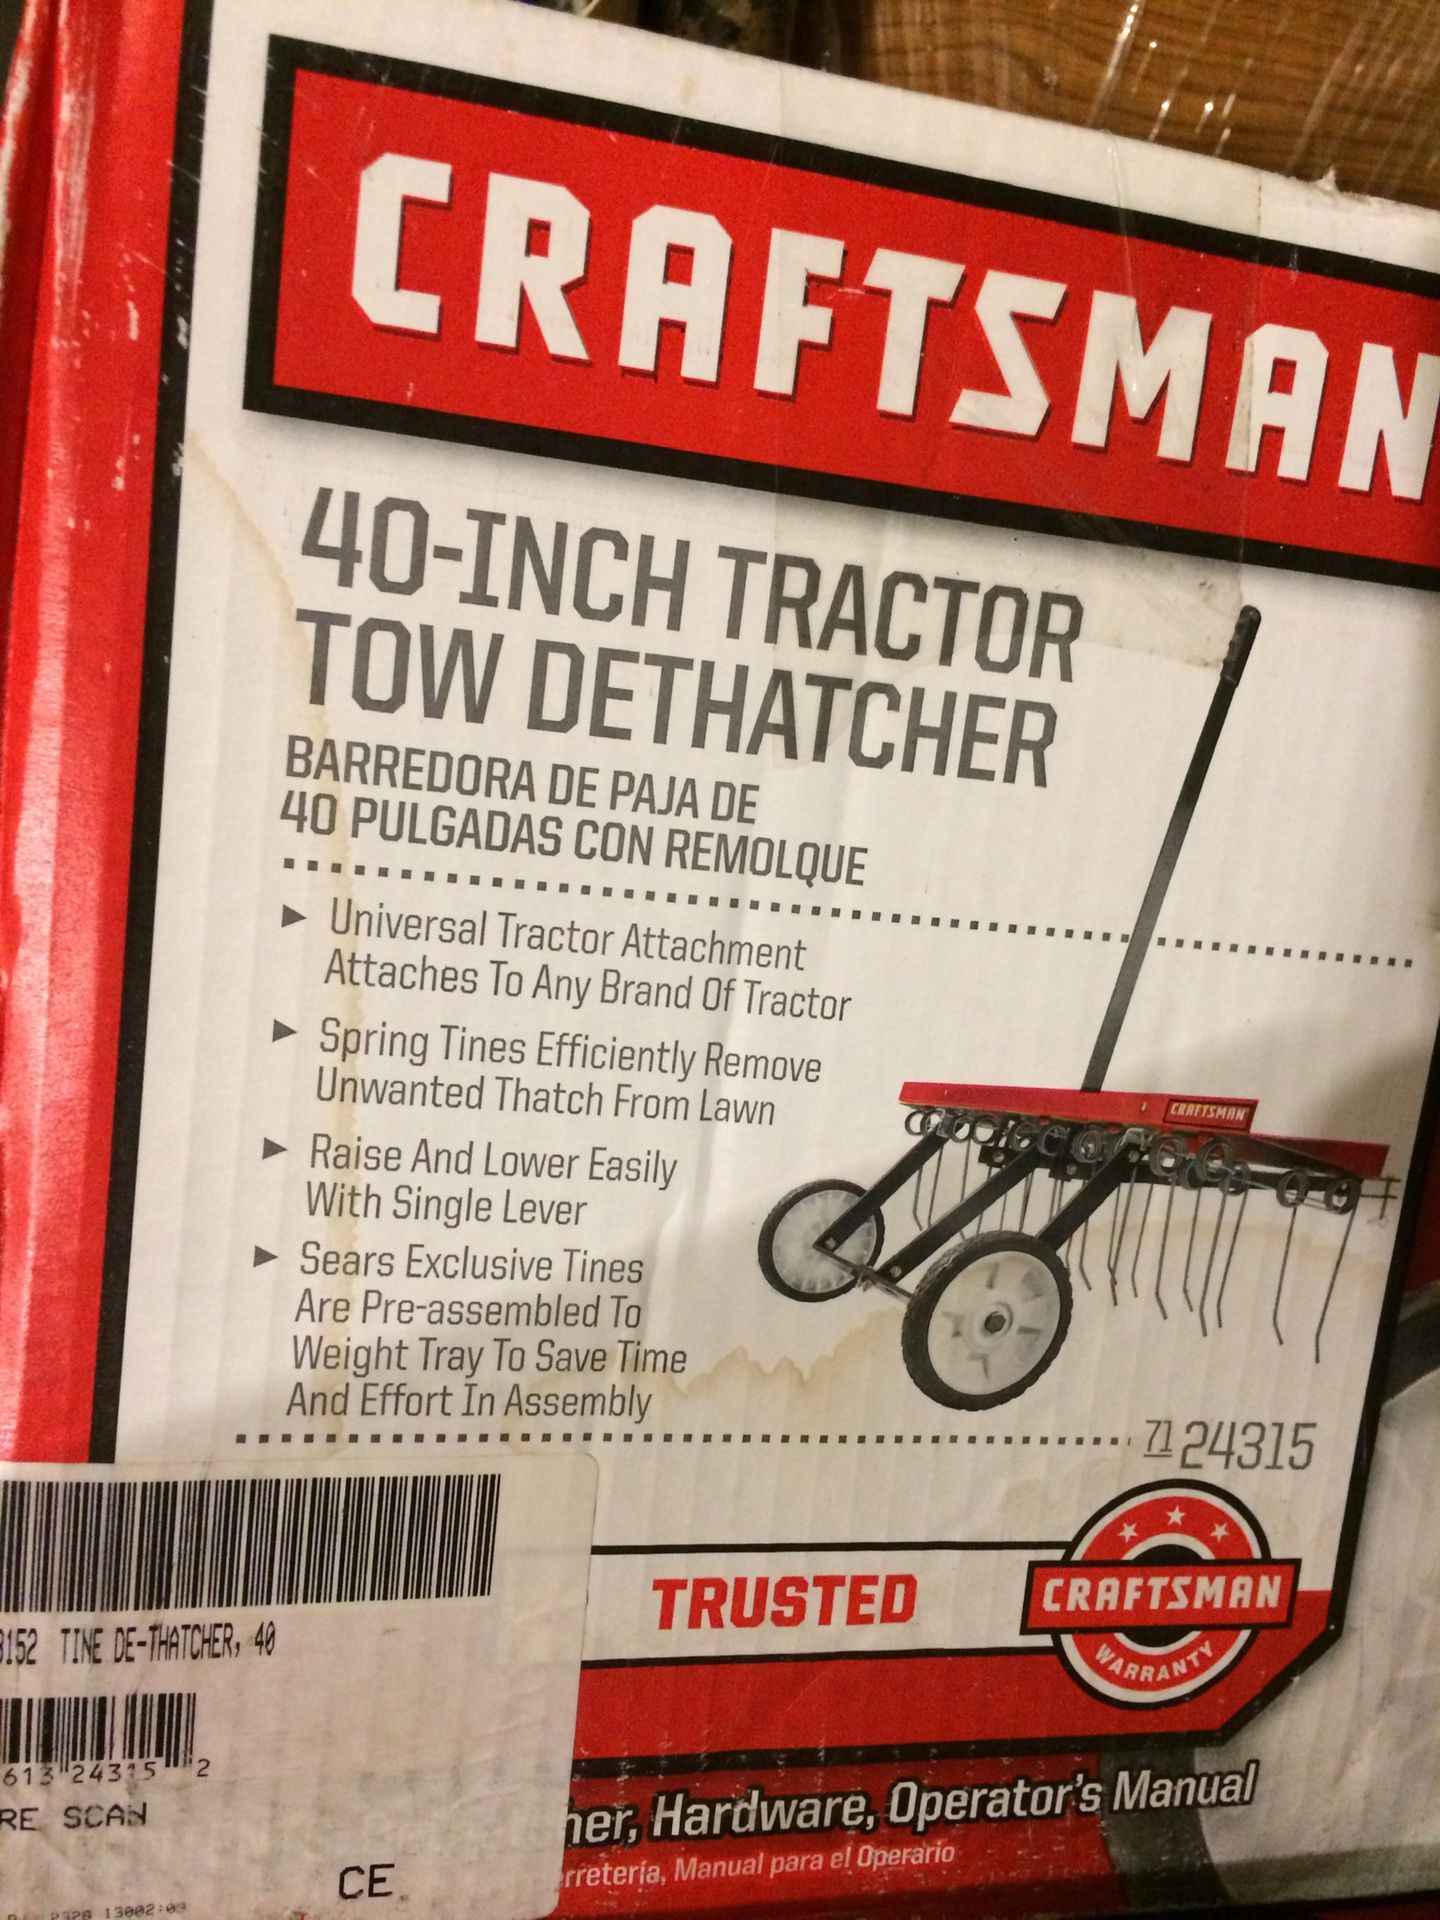 Tractor rear towing dethacher 40in NEW